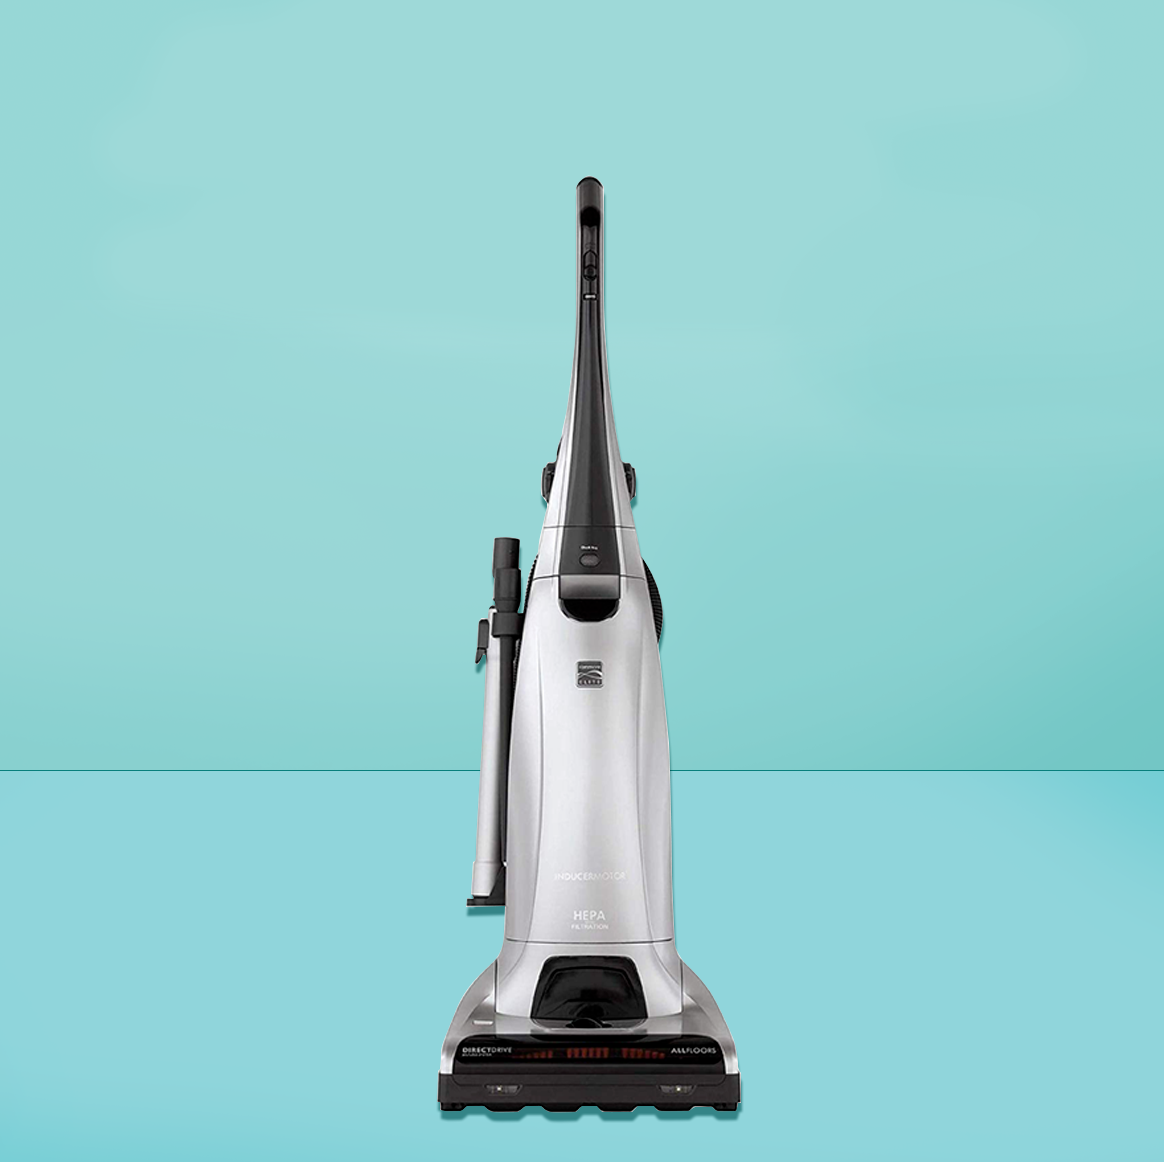 https://hips.hearstapps.com/hmg-prod/images/ghi-best-hepa-vacuums-1574871032.png?crop=0.582xw:0.894xh;0.212xw,0.0443xh&resize=1200:*